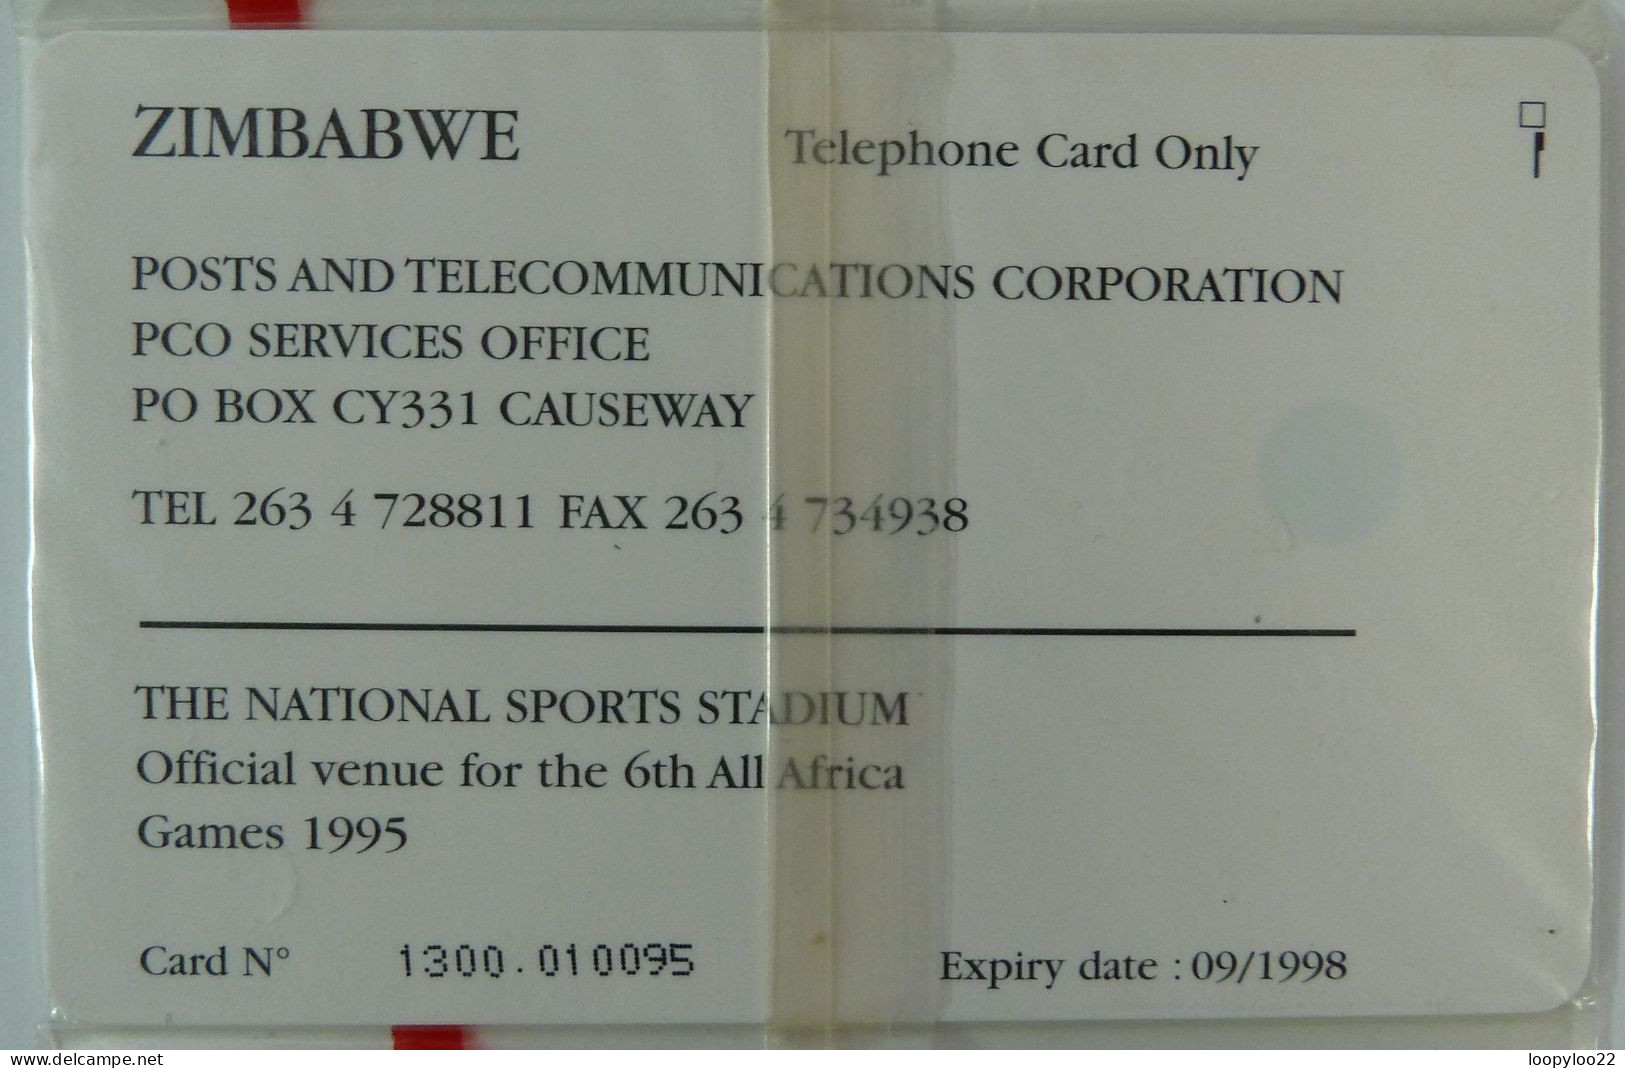 ZIMBABWE - 1st Issue - ZIM06 - 6th All Africa Games - $200 - 09/98 - Mint Blister - Simbabwe